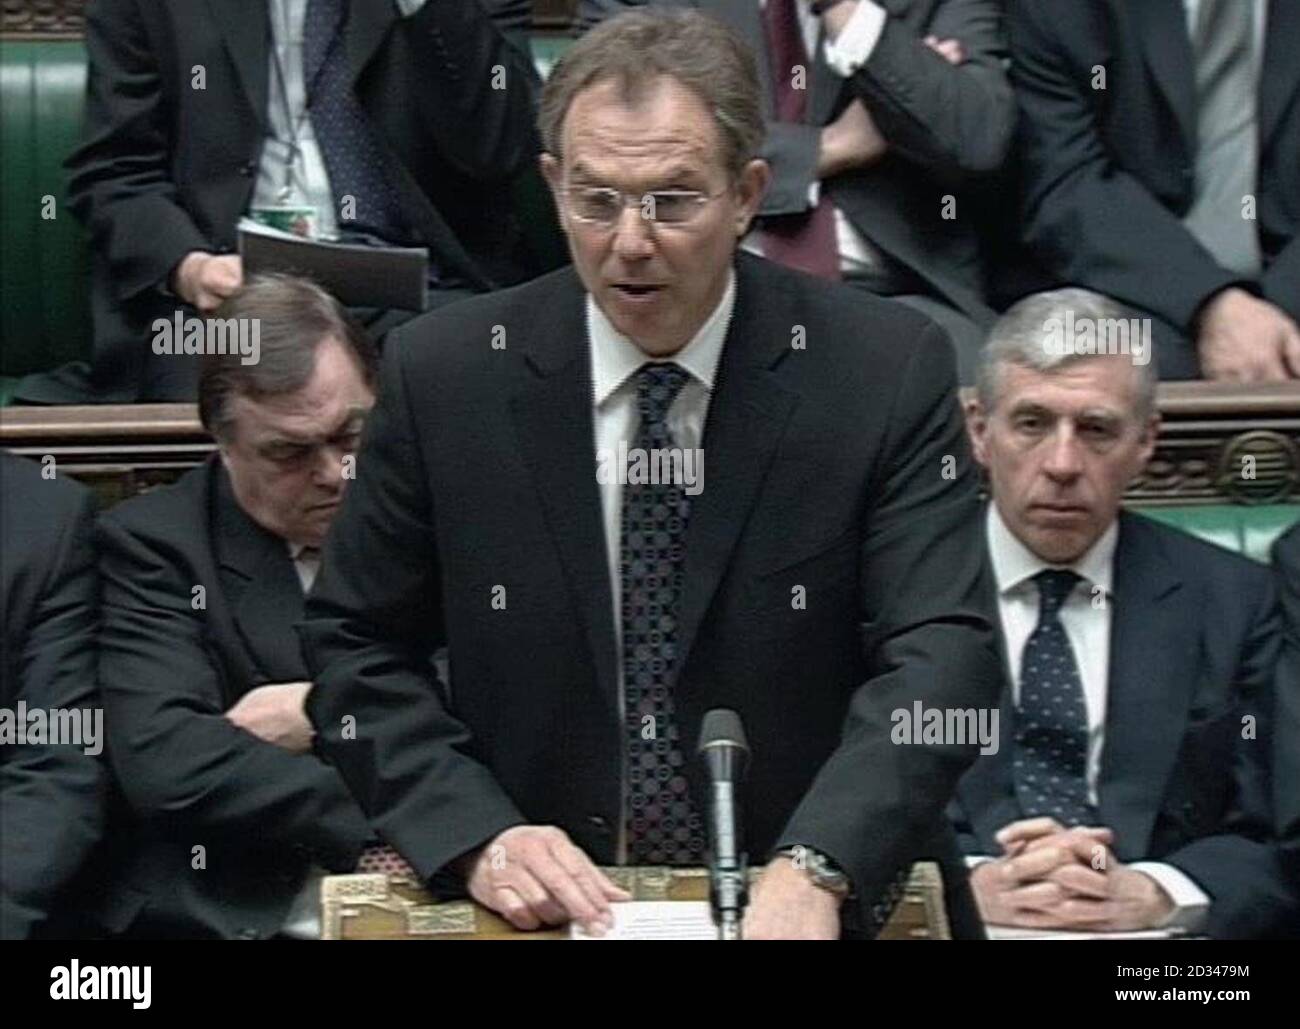 Videograb of Britain's Prime Minister Tony Blair as he issues a statement to the House of Commons updating MPs on the growing number of British deaths following the Asian tsunami disaster, Monday January 10, 2005. Mr Blair has also defended the Government's handling of the disaster, after he came under fire for not cutting short his holiday to deal with the crisis. Ministers have also been accused of lagging behind the public mood. See PA story POLITICS Blair. PRESS ASSOCIATION Photo. Photo credit should read: PA Stock Photo